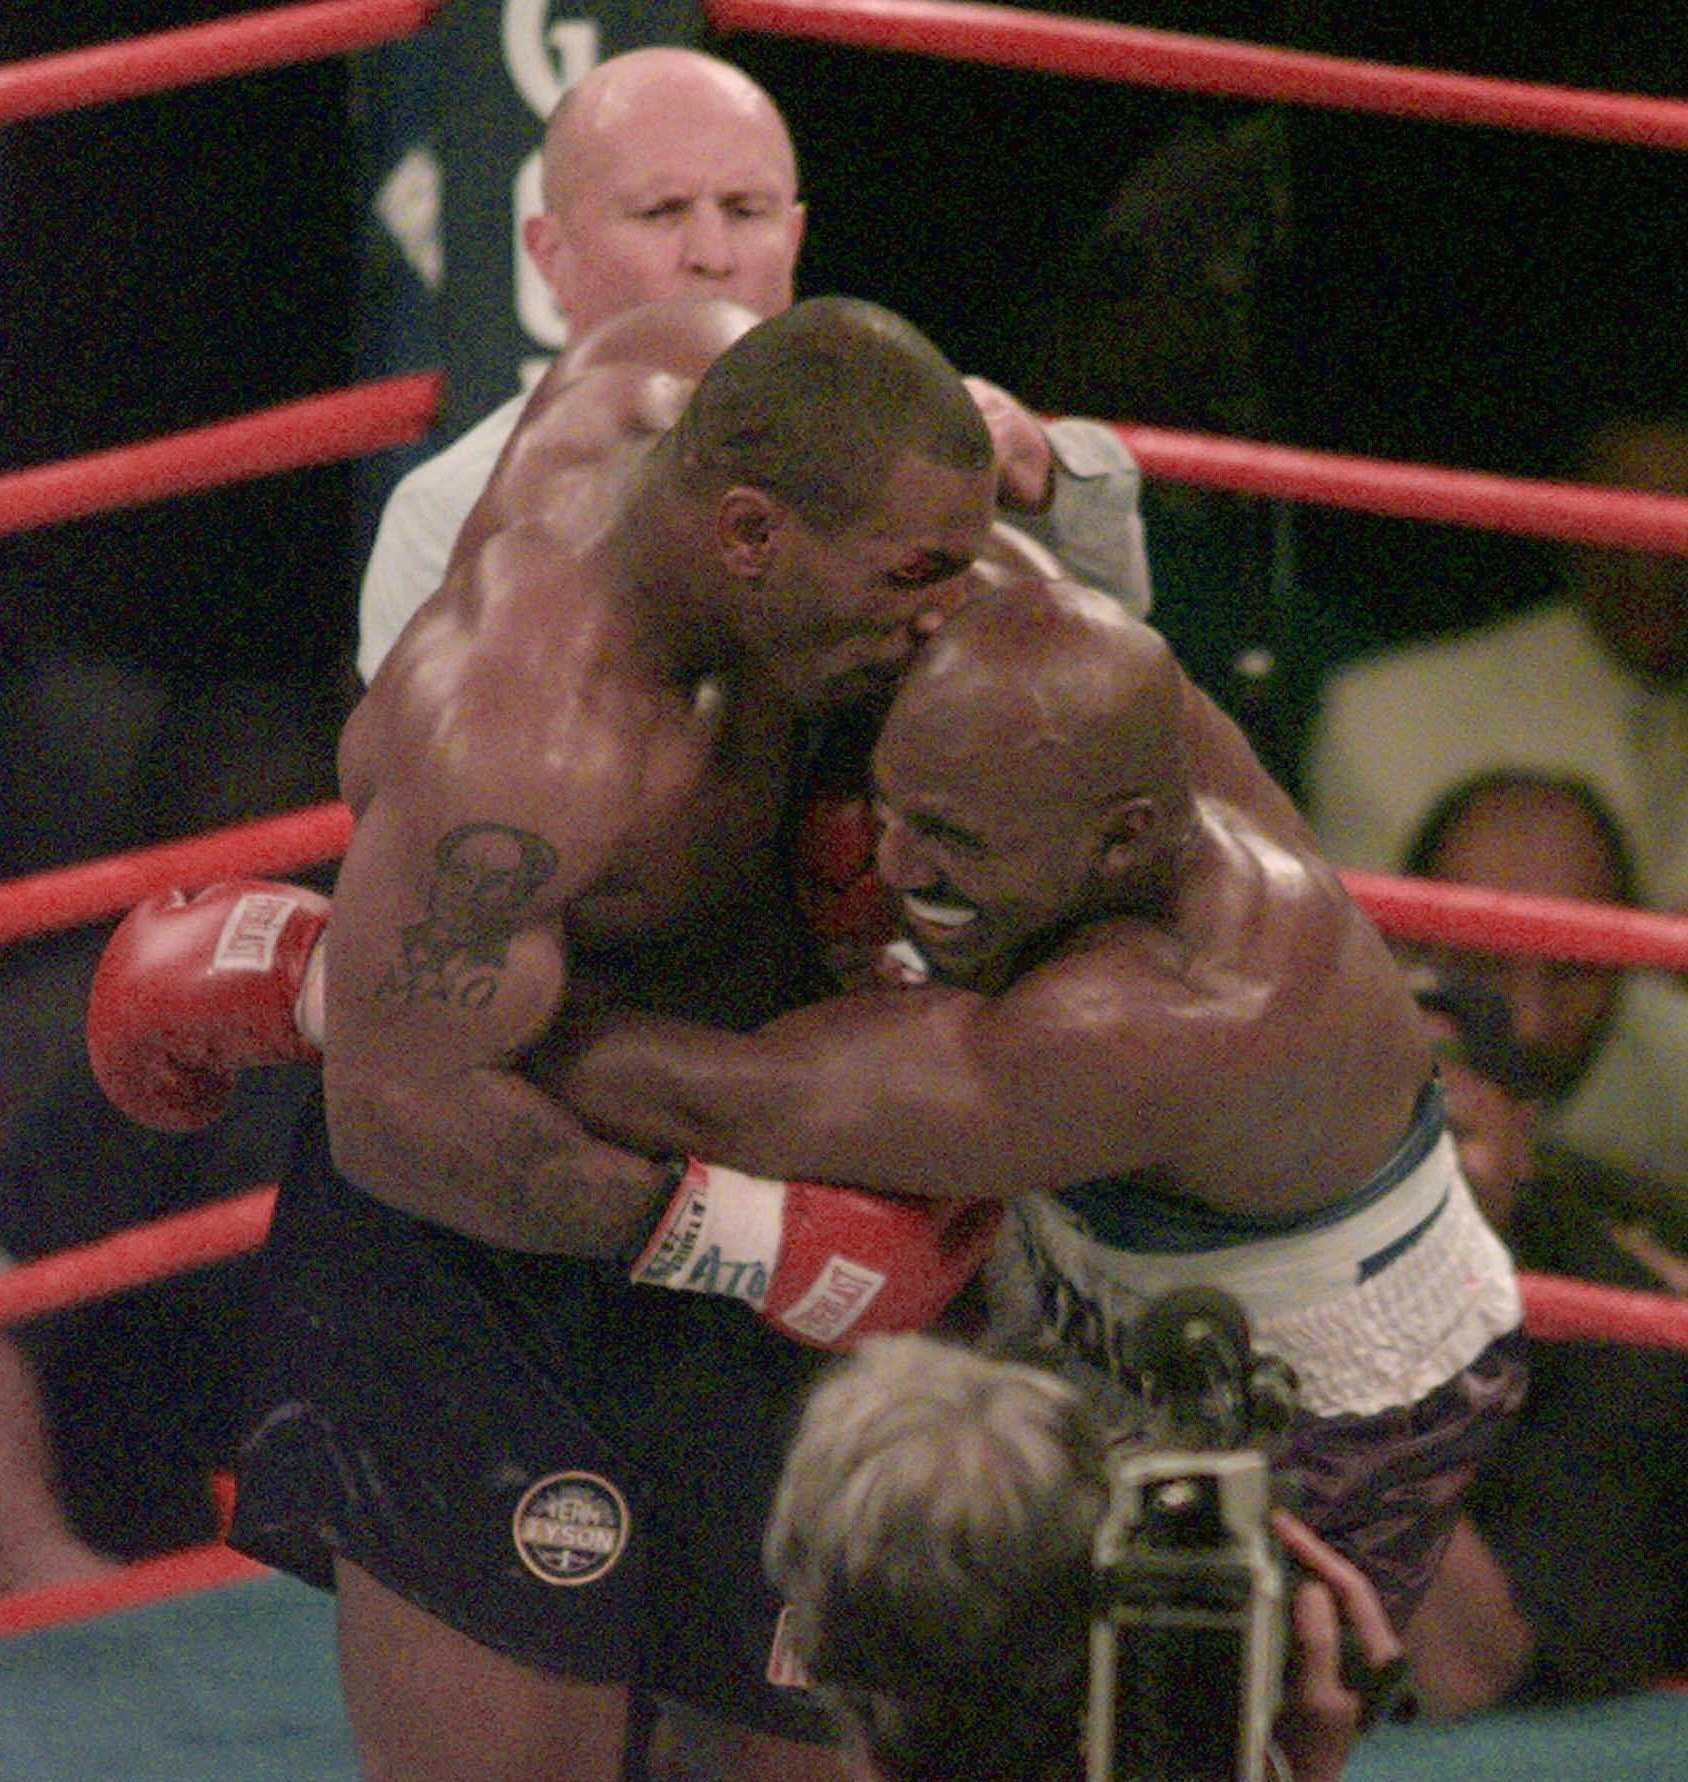 20 years ago, 'The Bite Fight' turned boxing on its head